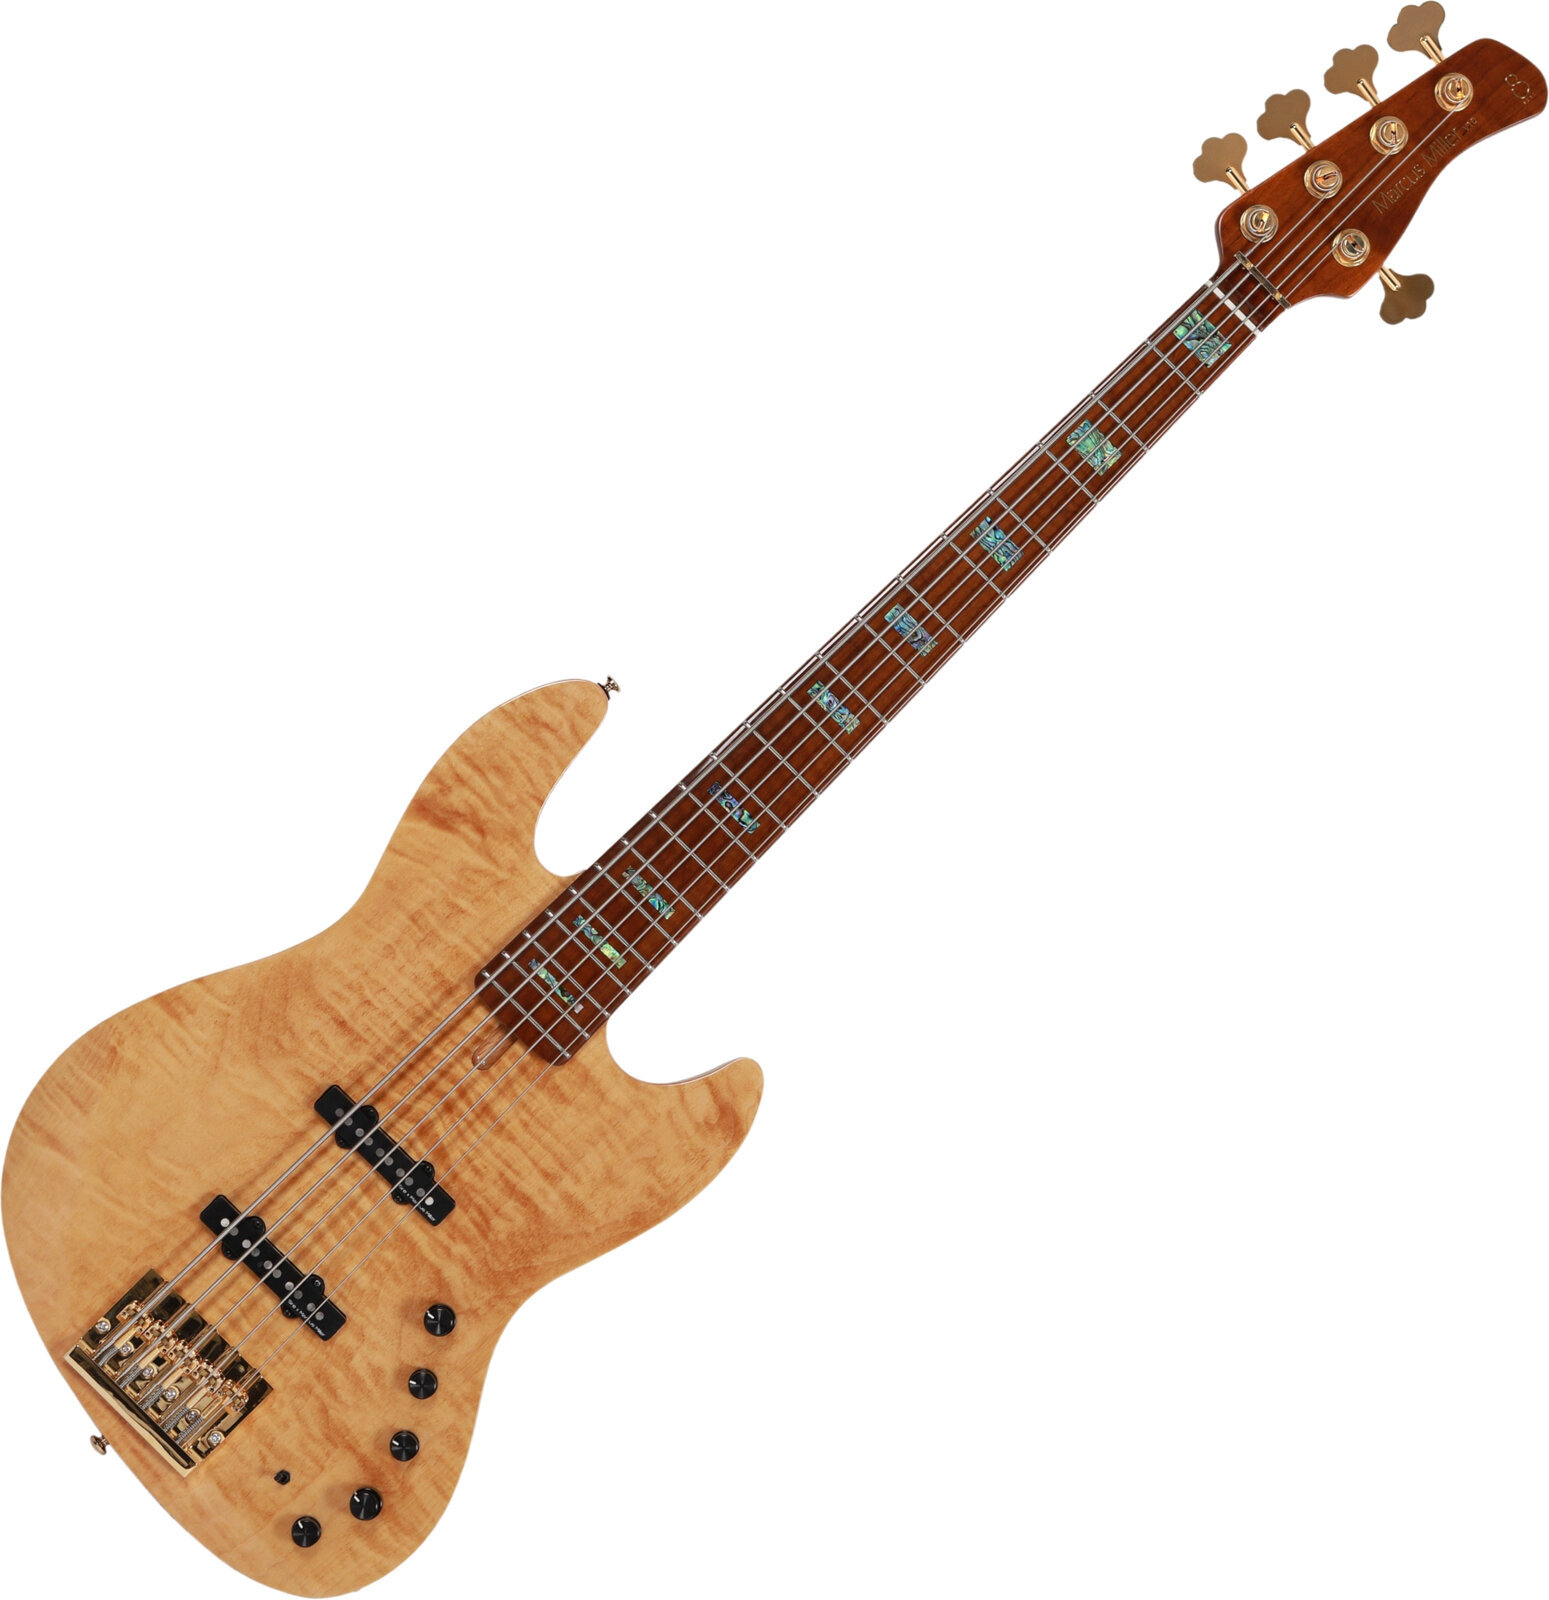 Bas cu 5 corzi Sire Marcus Miller V10 DX-5 Natural